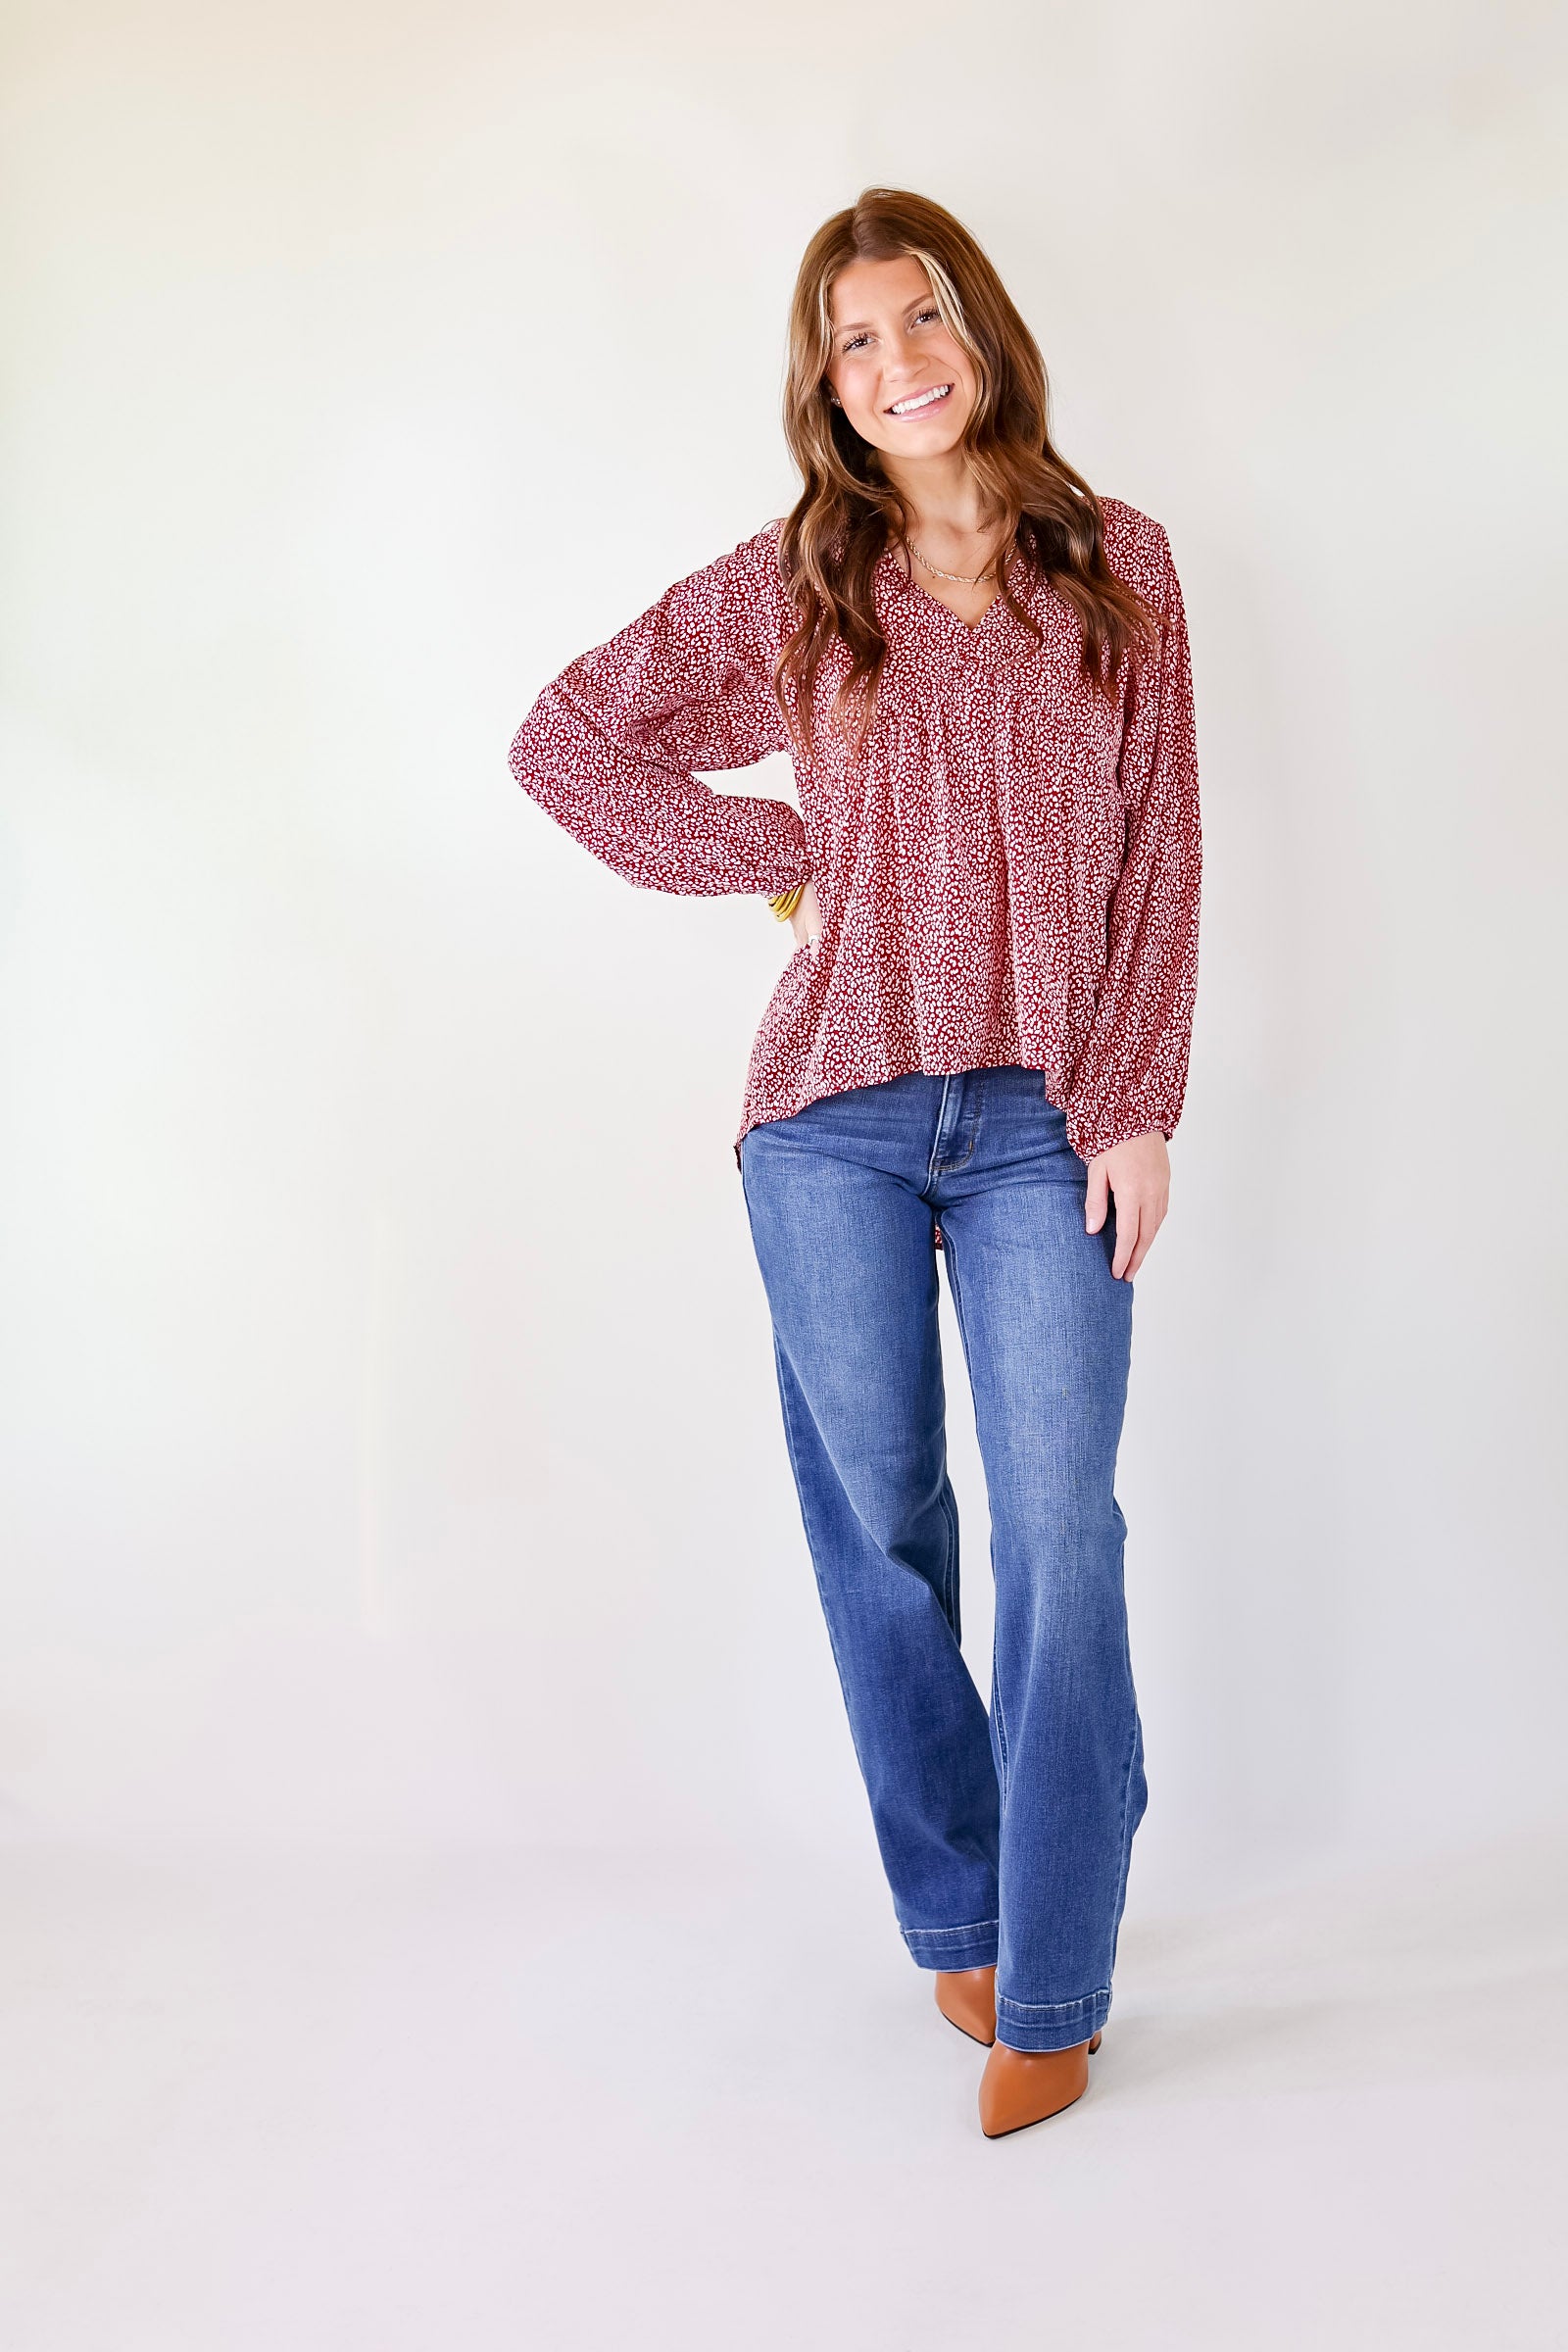 Really Dreamy Small Leopard Print Babydoll Top with Long Sleeves in Burgundy Red - Giddy Up Glamour Boutique